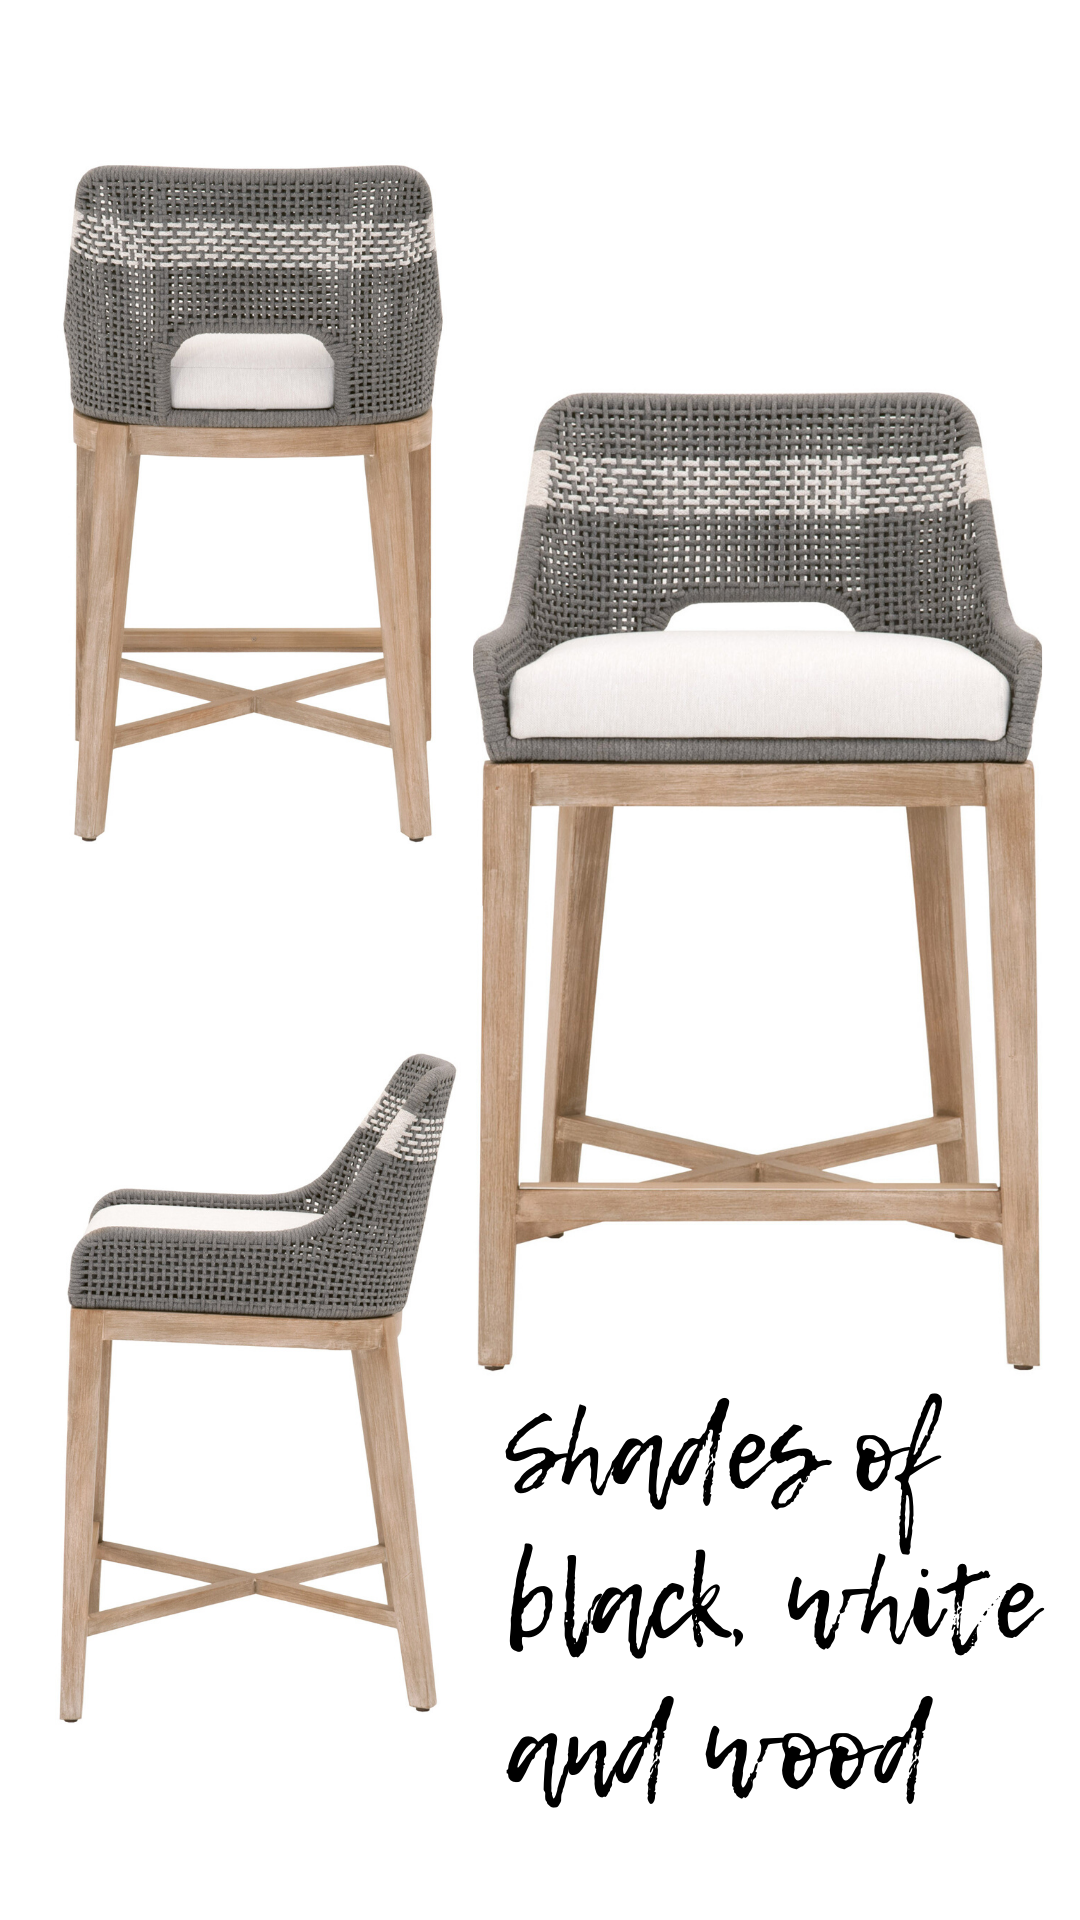 round-up-of-counter-stools-done-right-essential-for-living-tapestry-counter-stool-kathleen-jennison-stockton-california-interior-designer.png